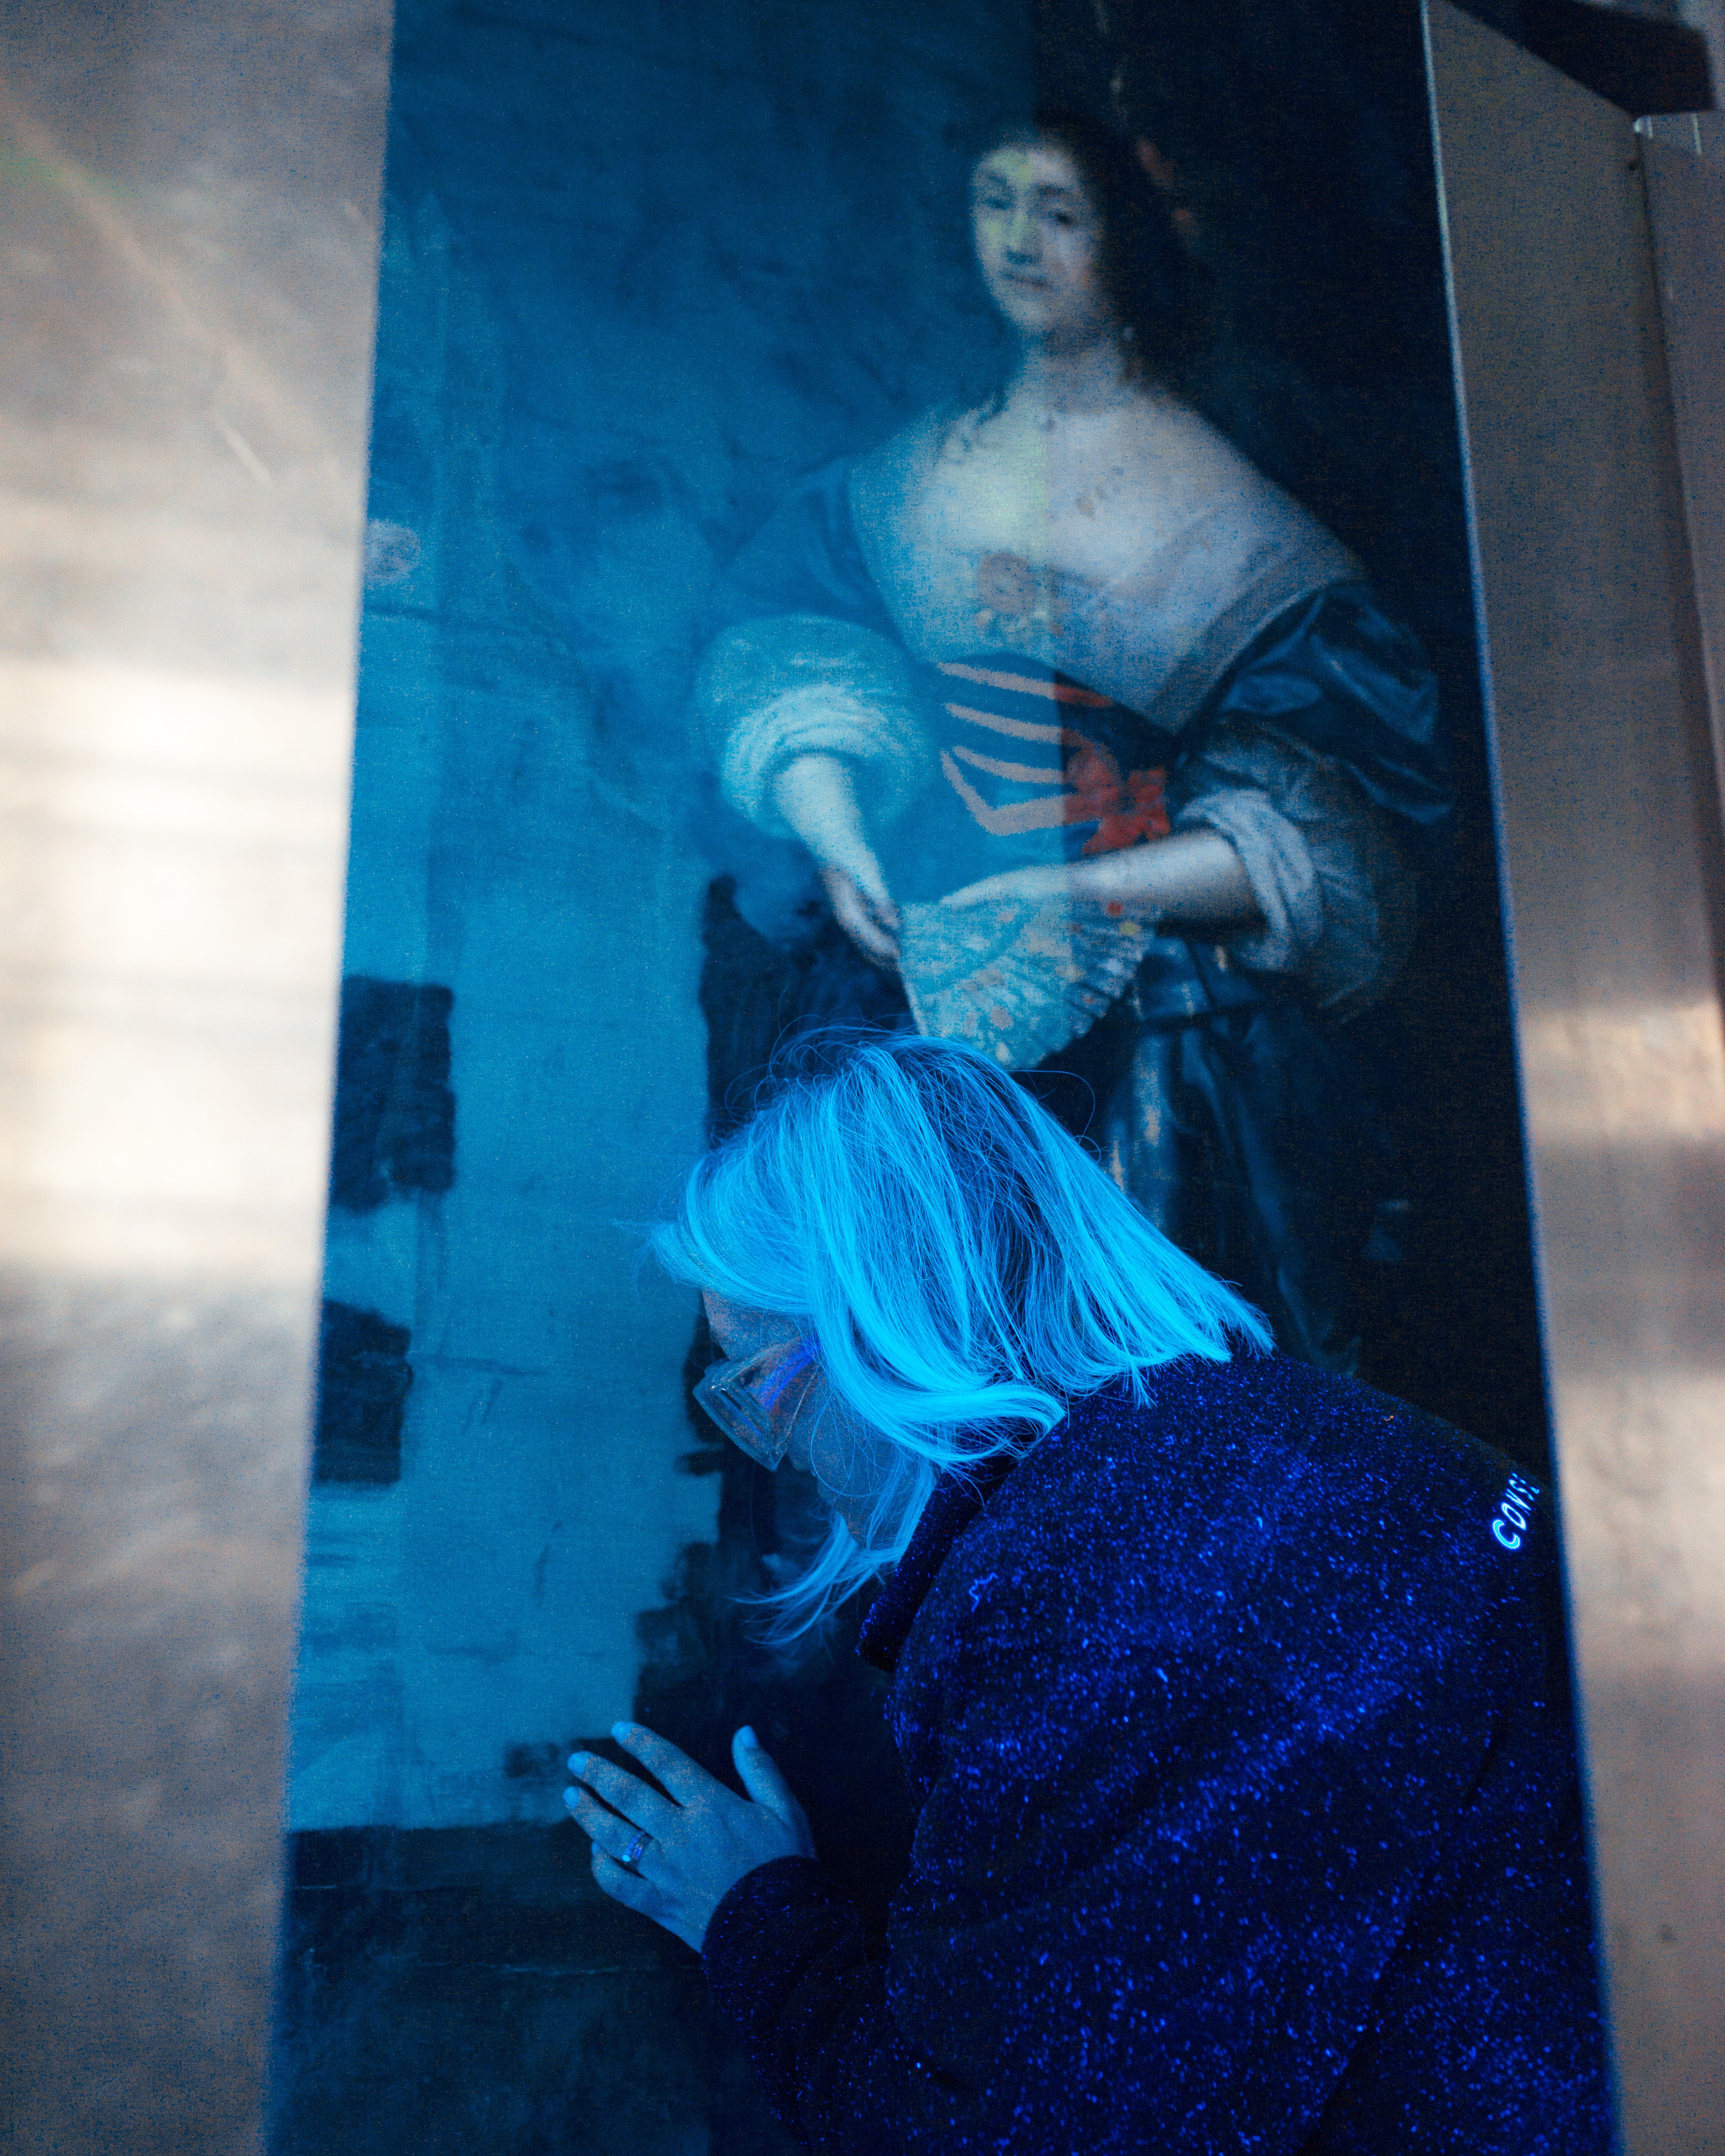 Image: Conservator looking at a painting under ultraviolet light